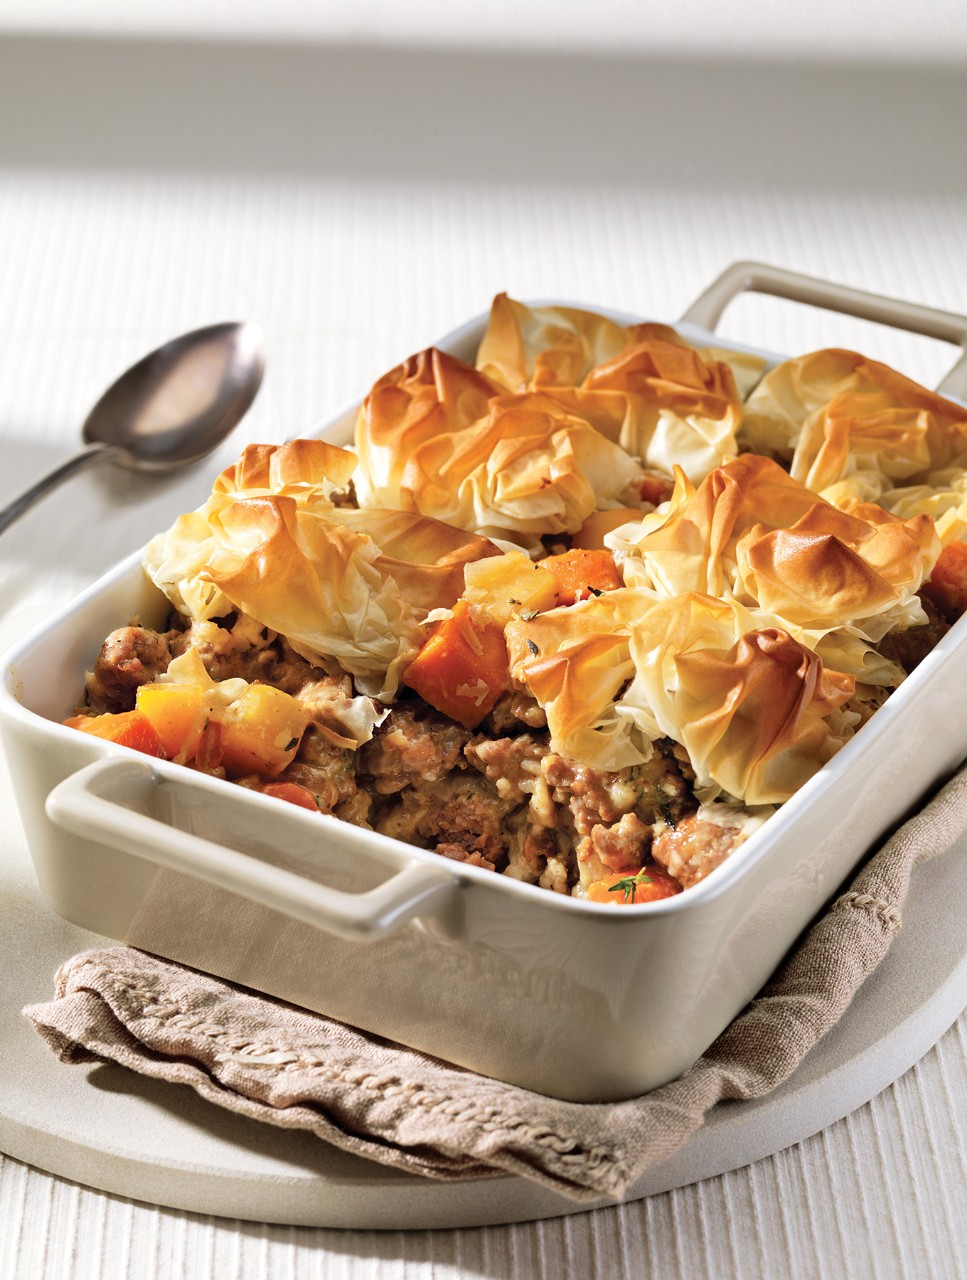 Cider-Braised Sausage Pie with Scrunched Phyllo Crust